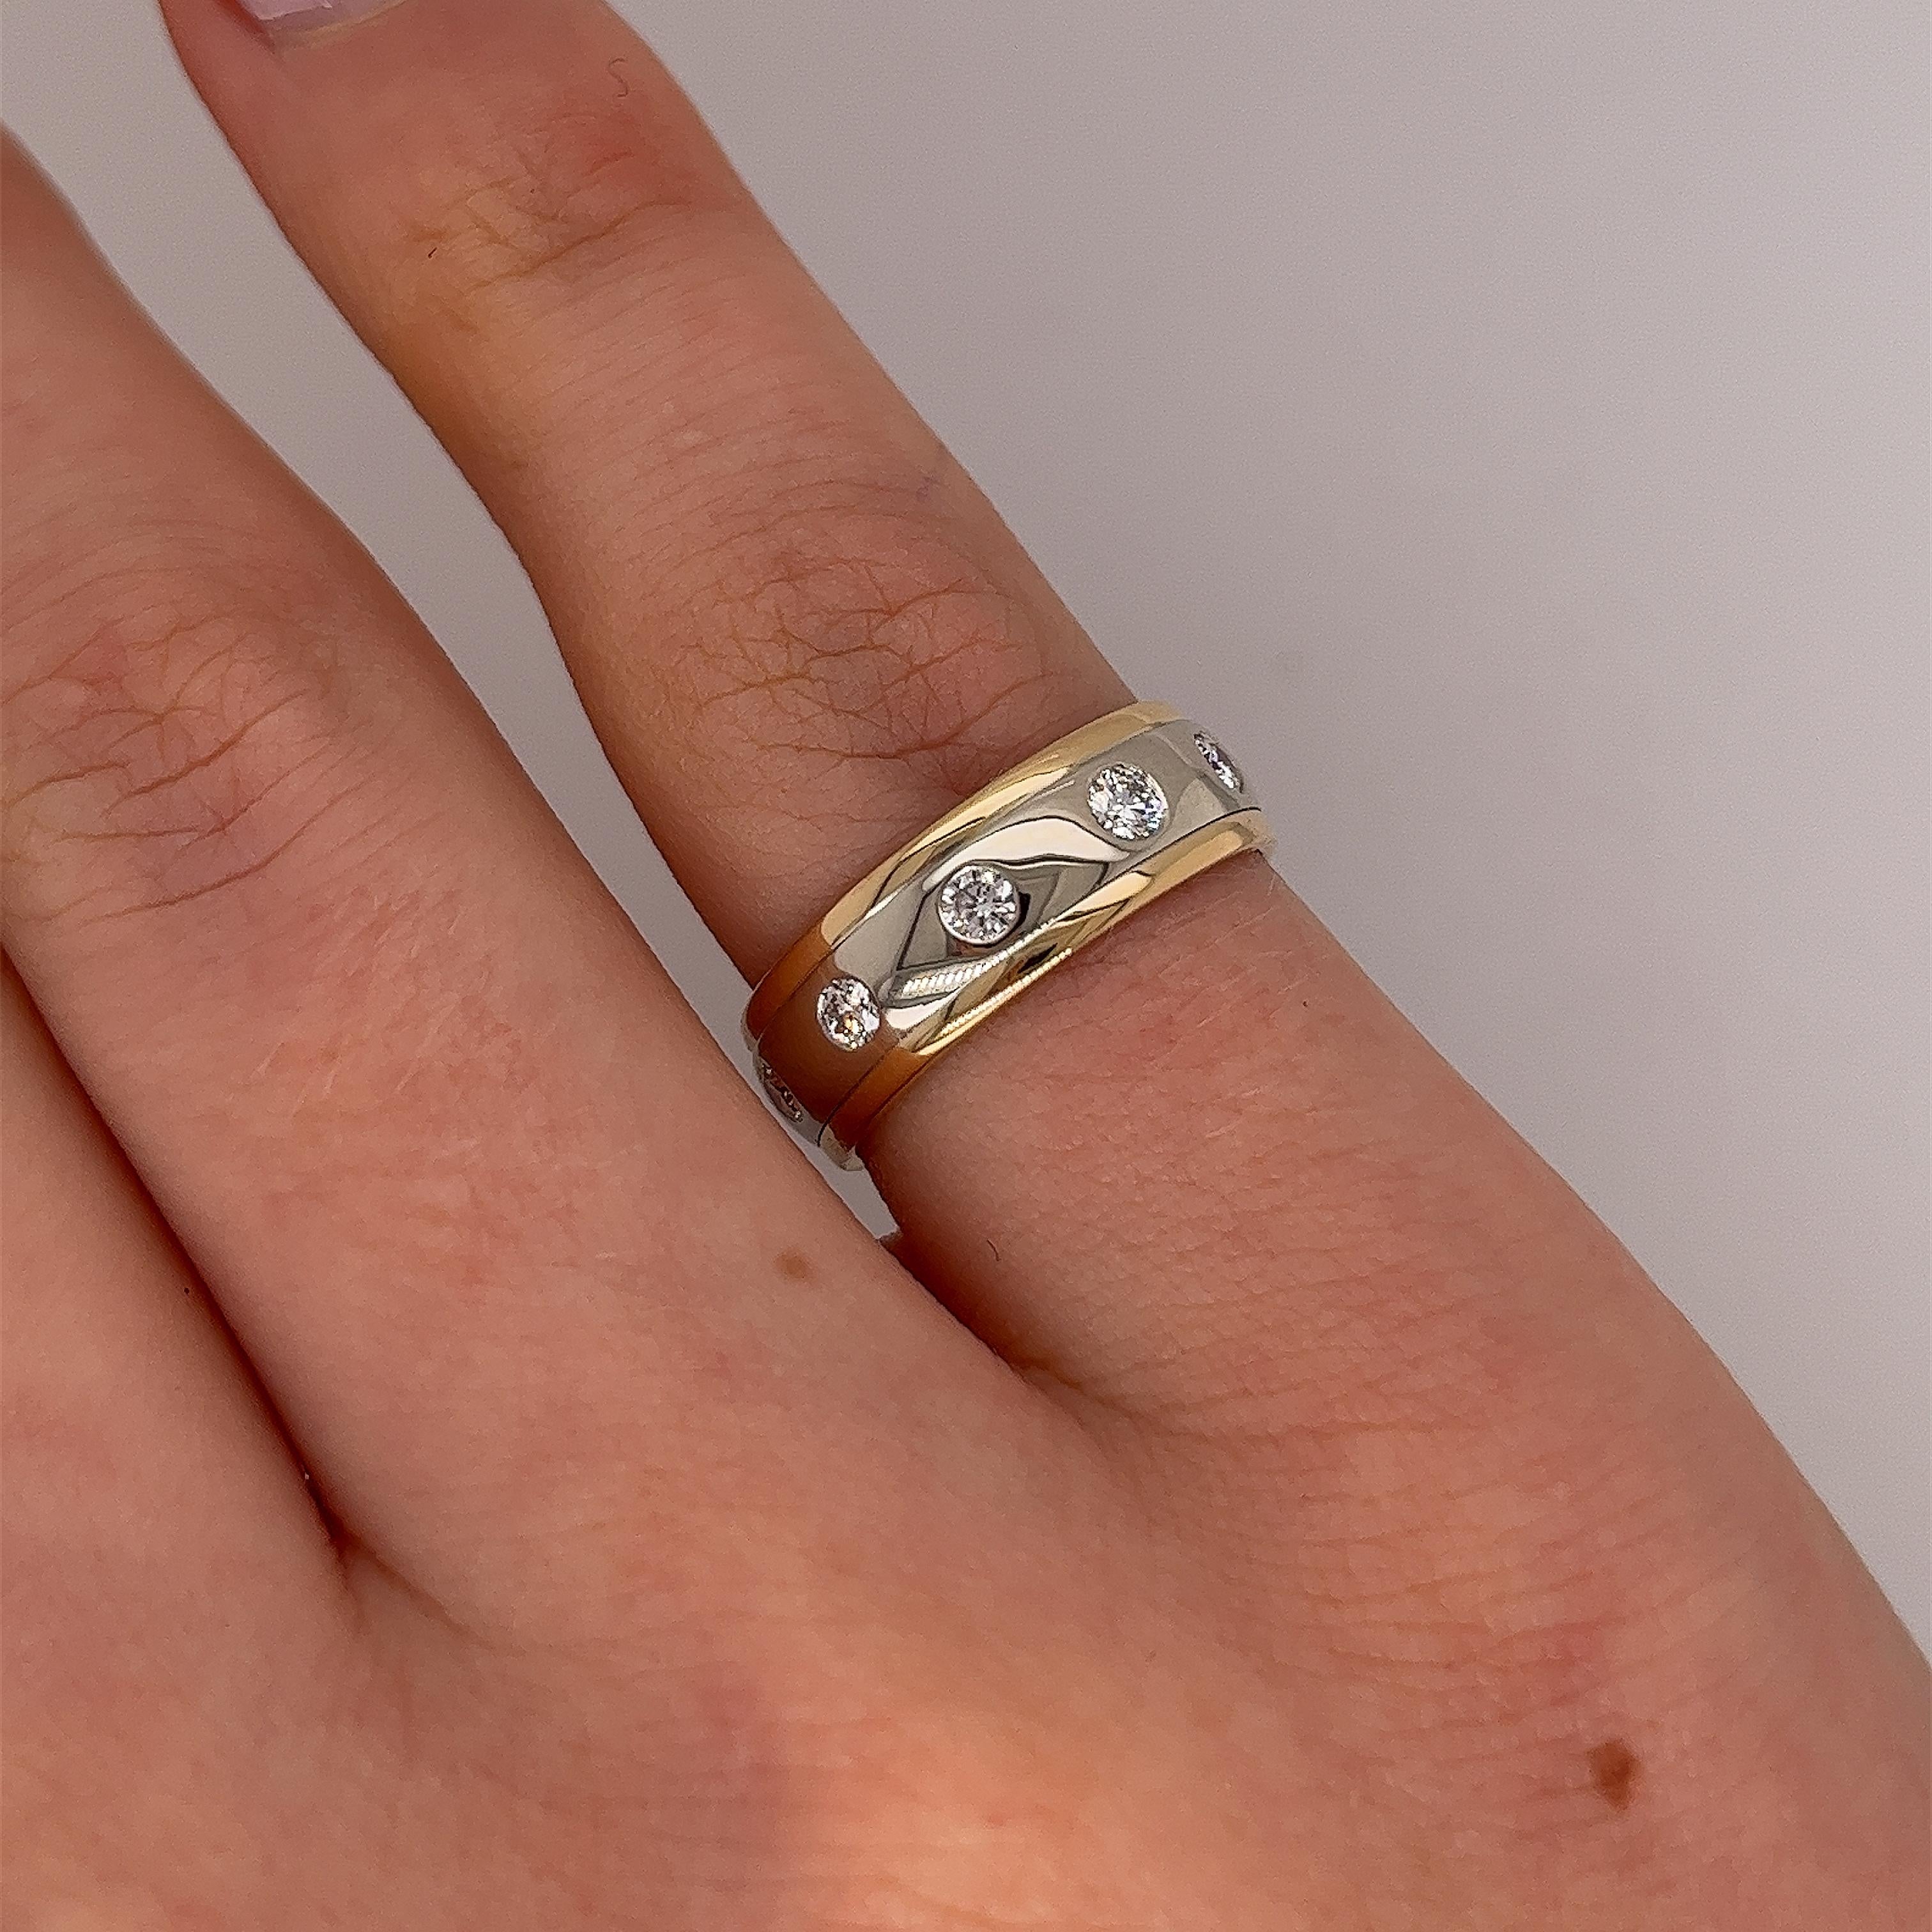 An elegant diamond band ring, set with 10 round brilliant cut natural diamonds, 0.35ct total diamond weight. In an 18ct yellow and white gold setting.

Total Diamond Weight: 0.35ct
Diamond Colour: G-H
Diamond Clarity: SI1
Width of Band: 5.92mm
Total